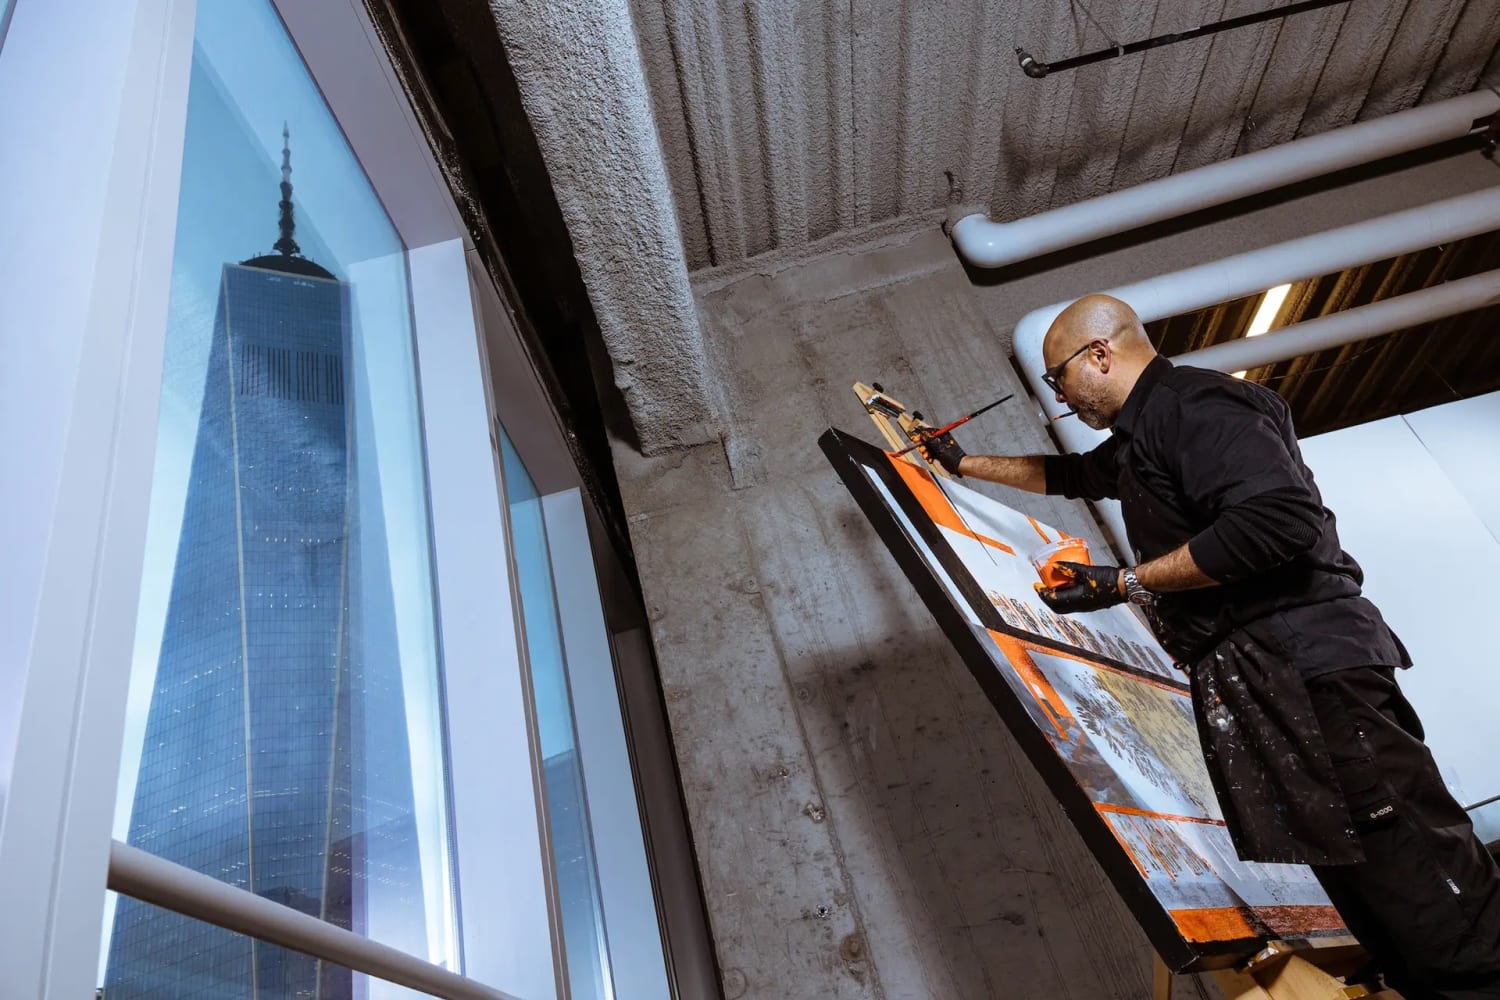 Studio residency at the World Trade Center reserves space for formerly incarcerated artists